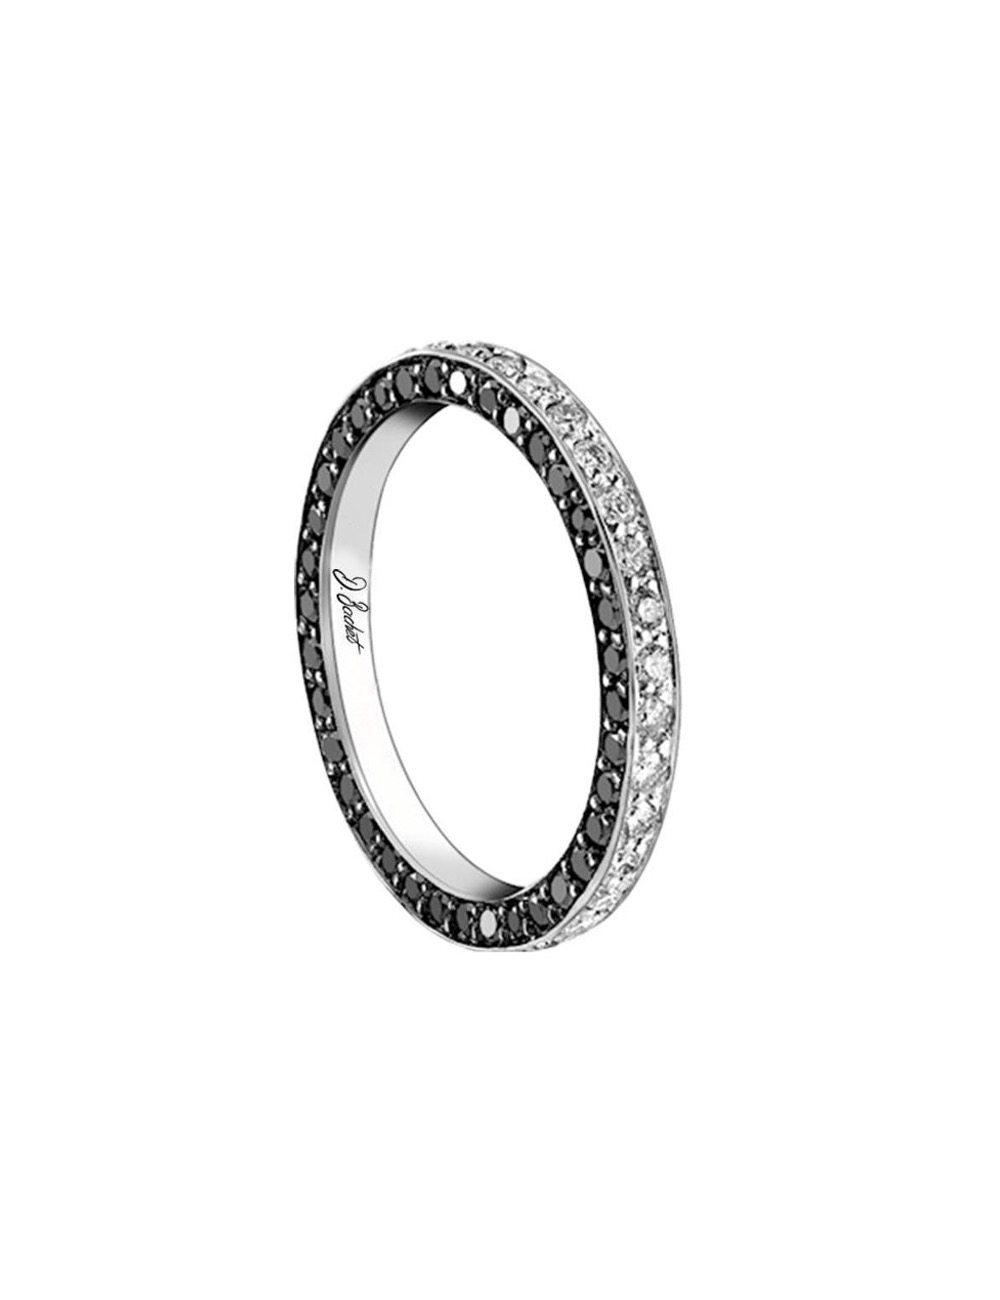 Diamond ring for women with white and black diamonds, perfect alone or with an engagement ring.